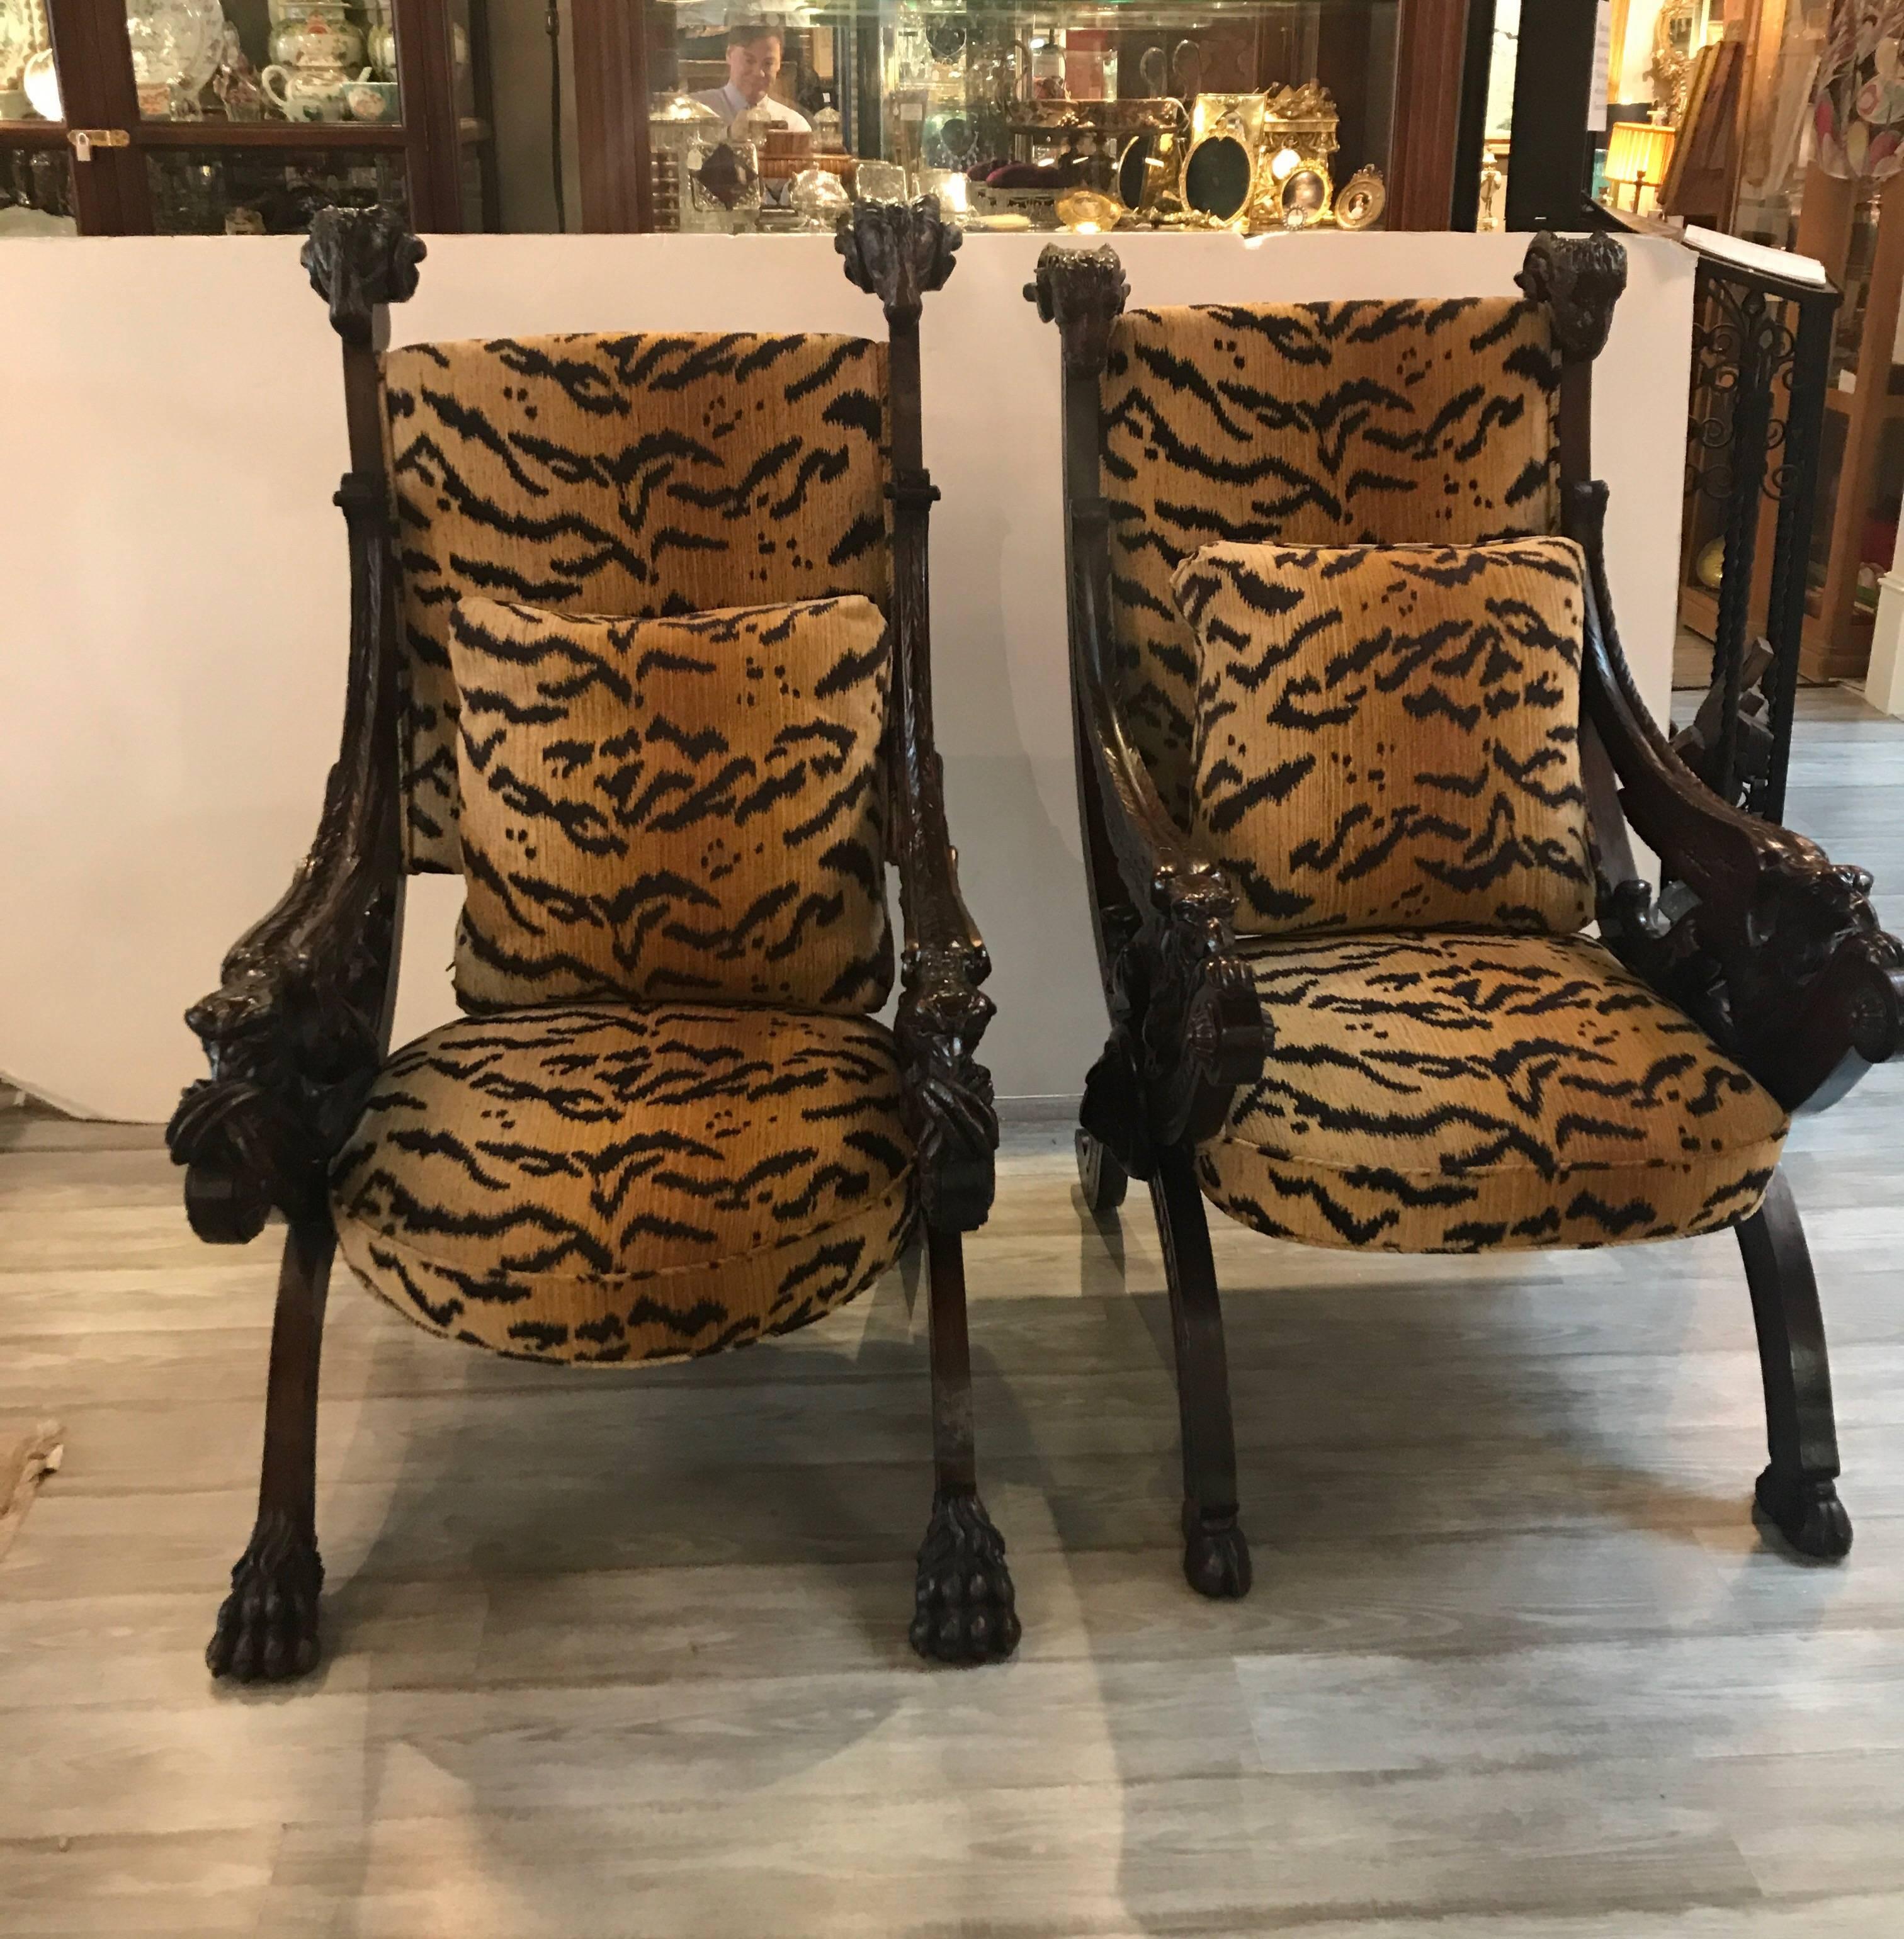 Extraordinary pair of hand carved walnut Renaissance Revival throne chairs. The heavily carved frames with winged figures of the sides, rams heads at the top and highly detailed carvings all-over. The recent fabric is a chenille in a tiger skin